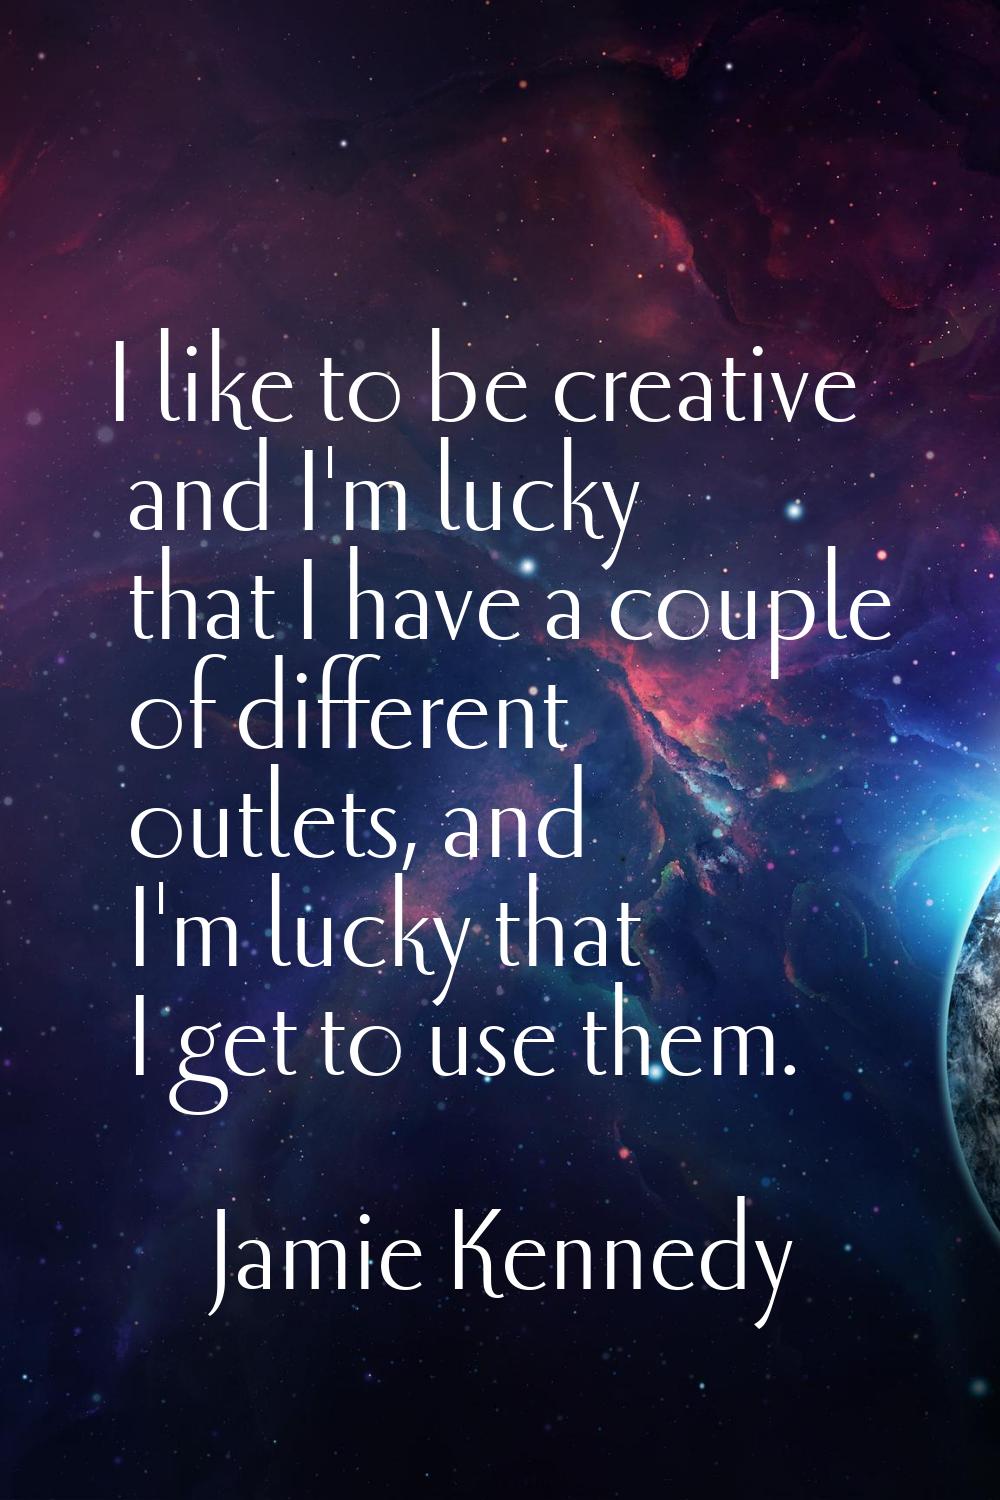 I like to be creative and I'm lucky that I have a couple of different outlets, and I'm lucky that I